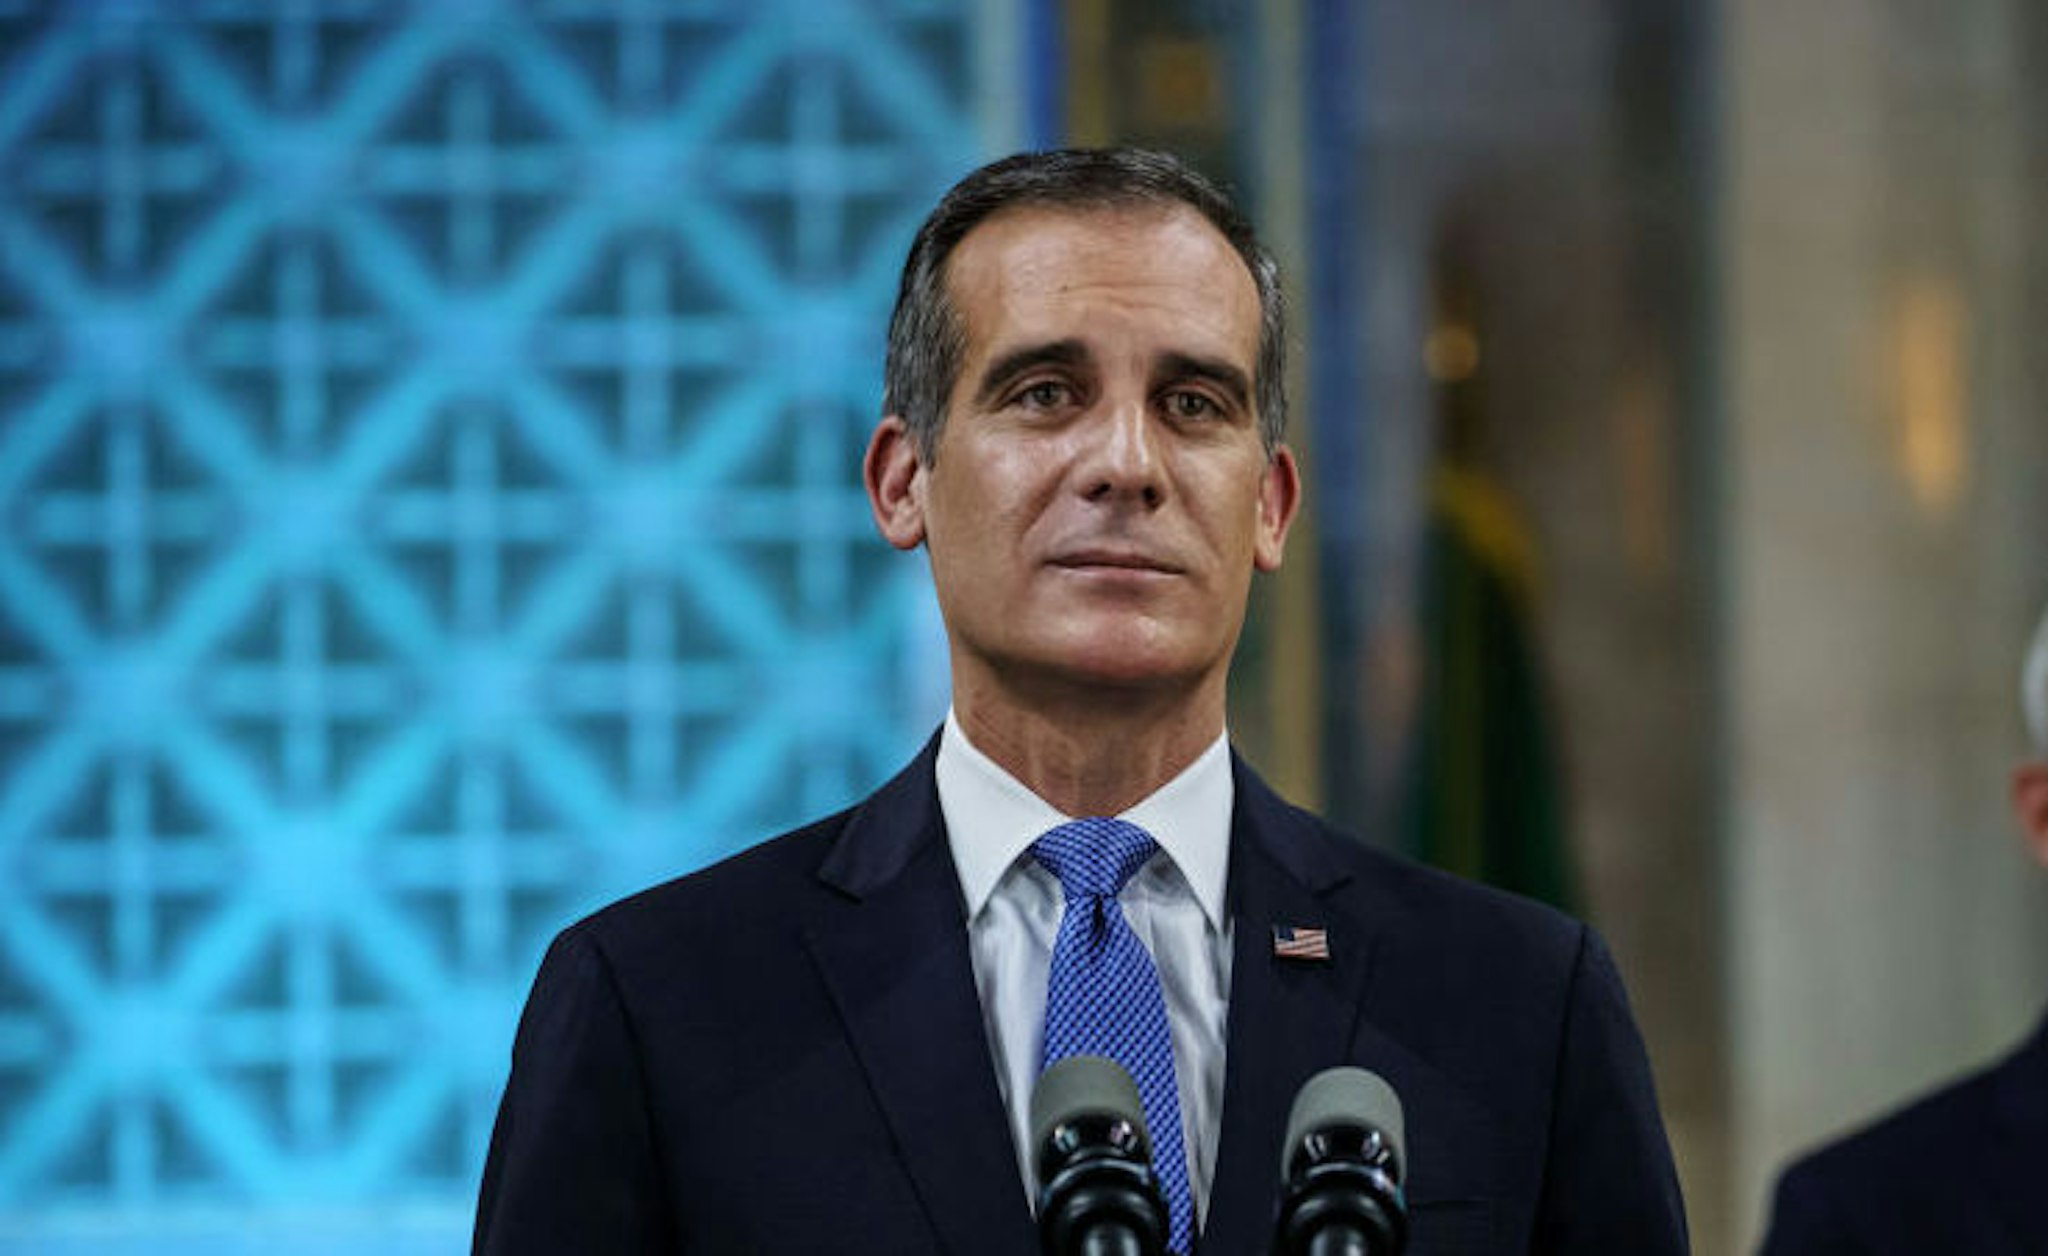 LOS ANGELES, CALIF. -- SUNDAY, APRIL 19, 2020: Los Angeles Mayor Eric Garcetti tears up as he gives his annual 'State of the City' speech at City Hall in Los Angeles, Calif., on April 19, 2020.